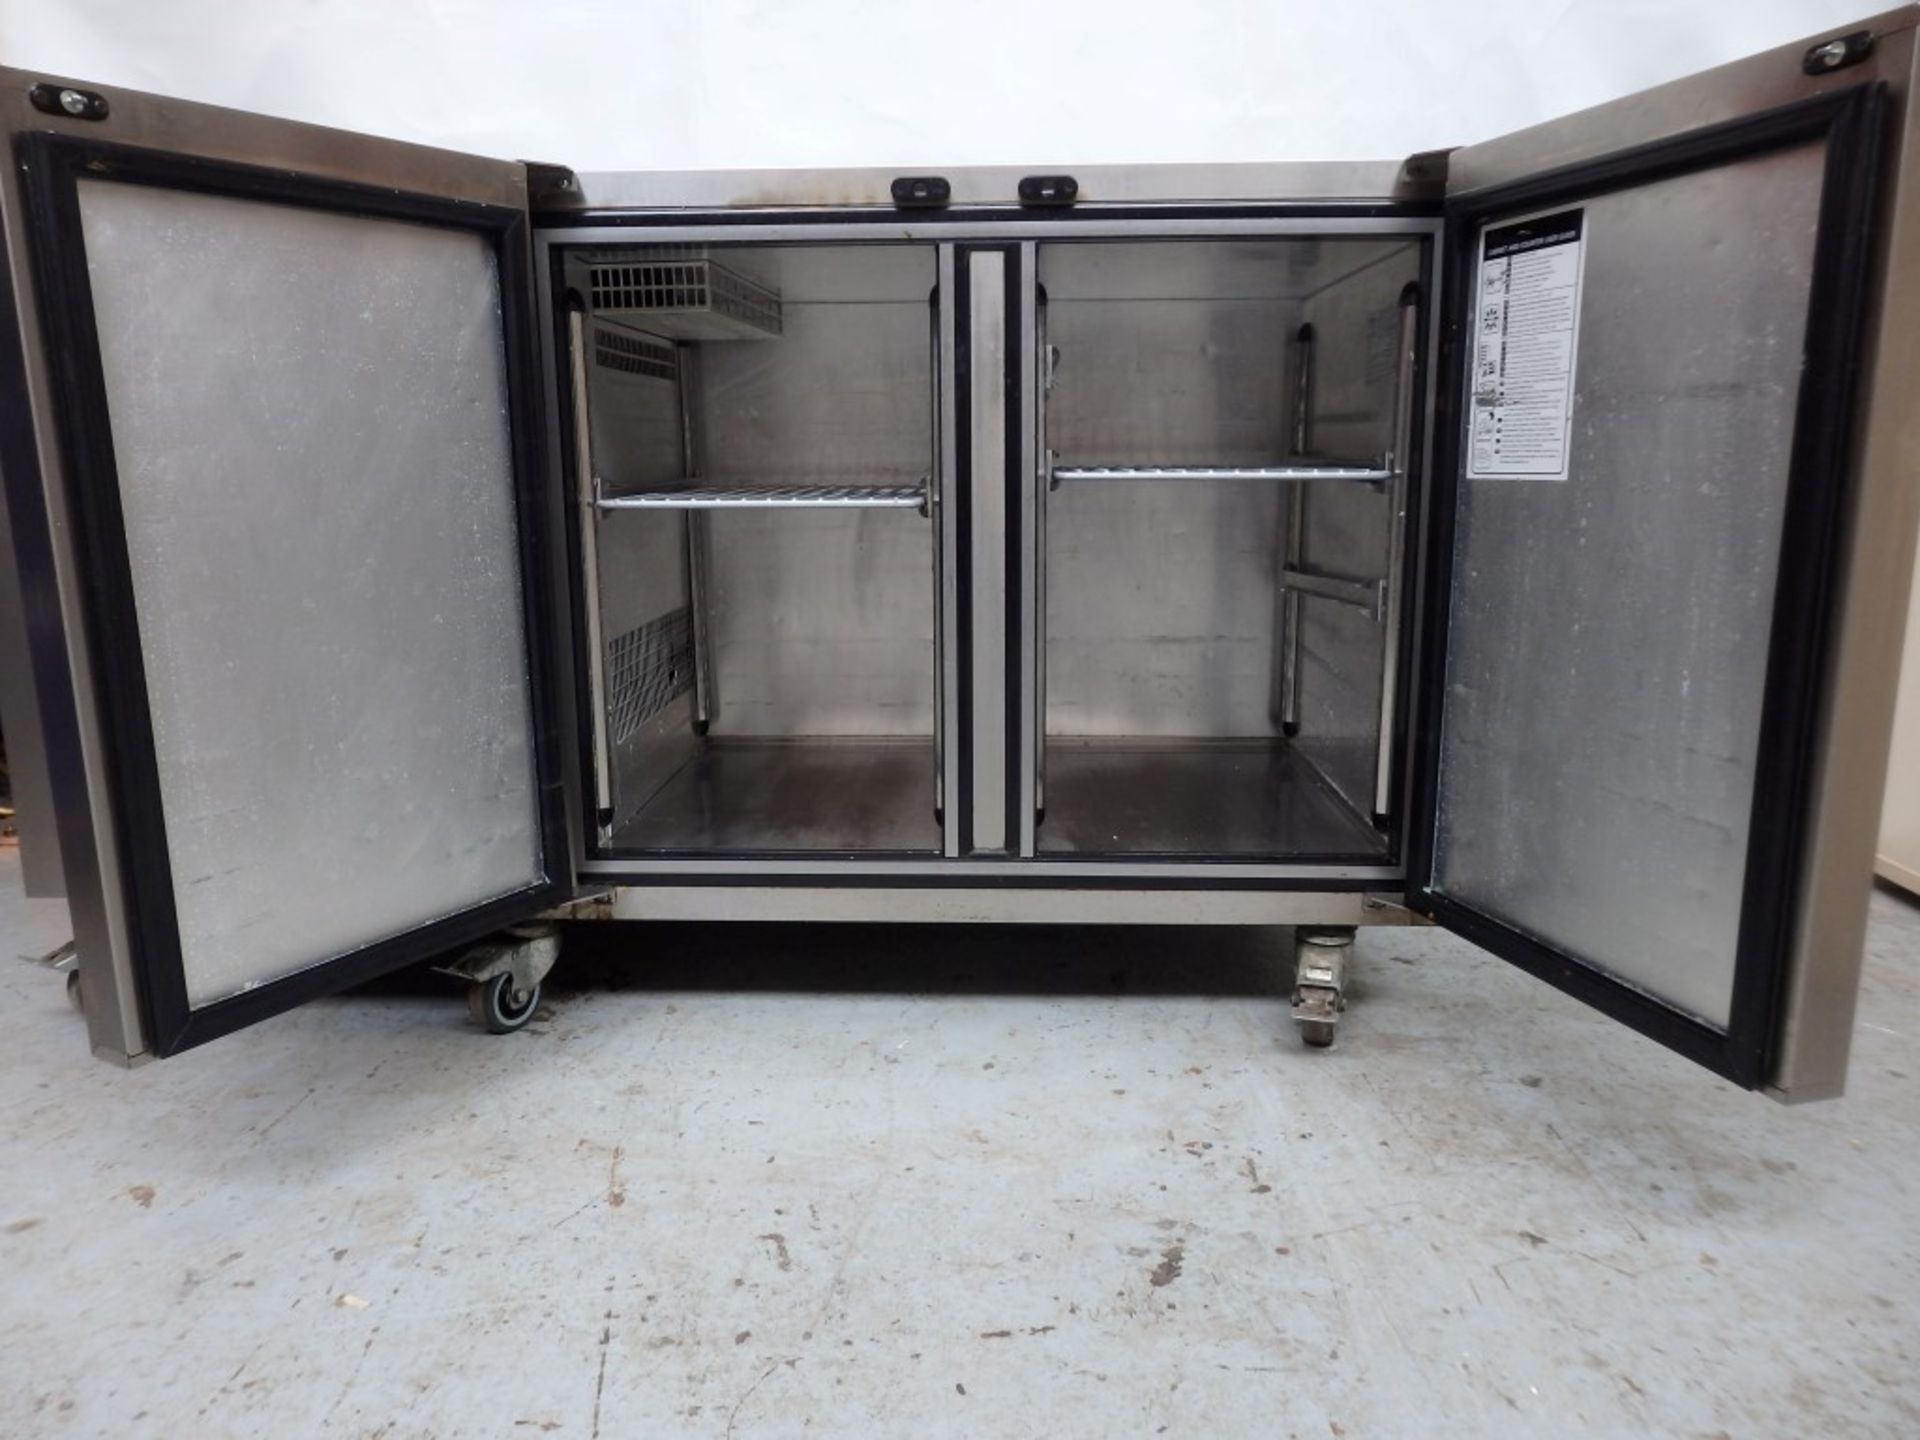 1 x FOSTER Commercial Undercounter Refrigerator With 2-Door Storage, Drawer And Stainless Steel - Image 7 of 13